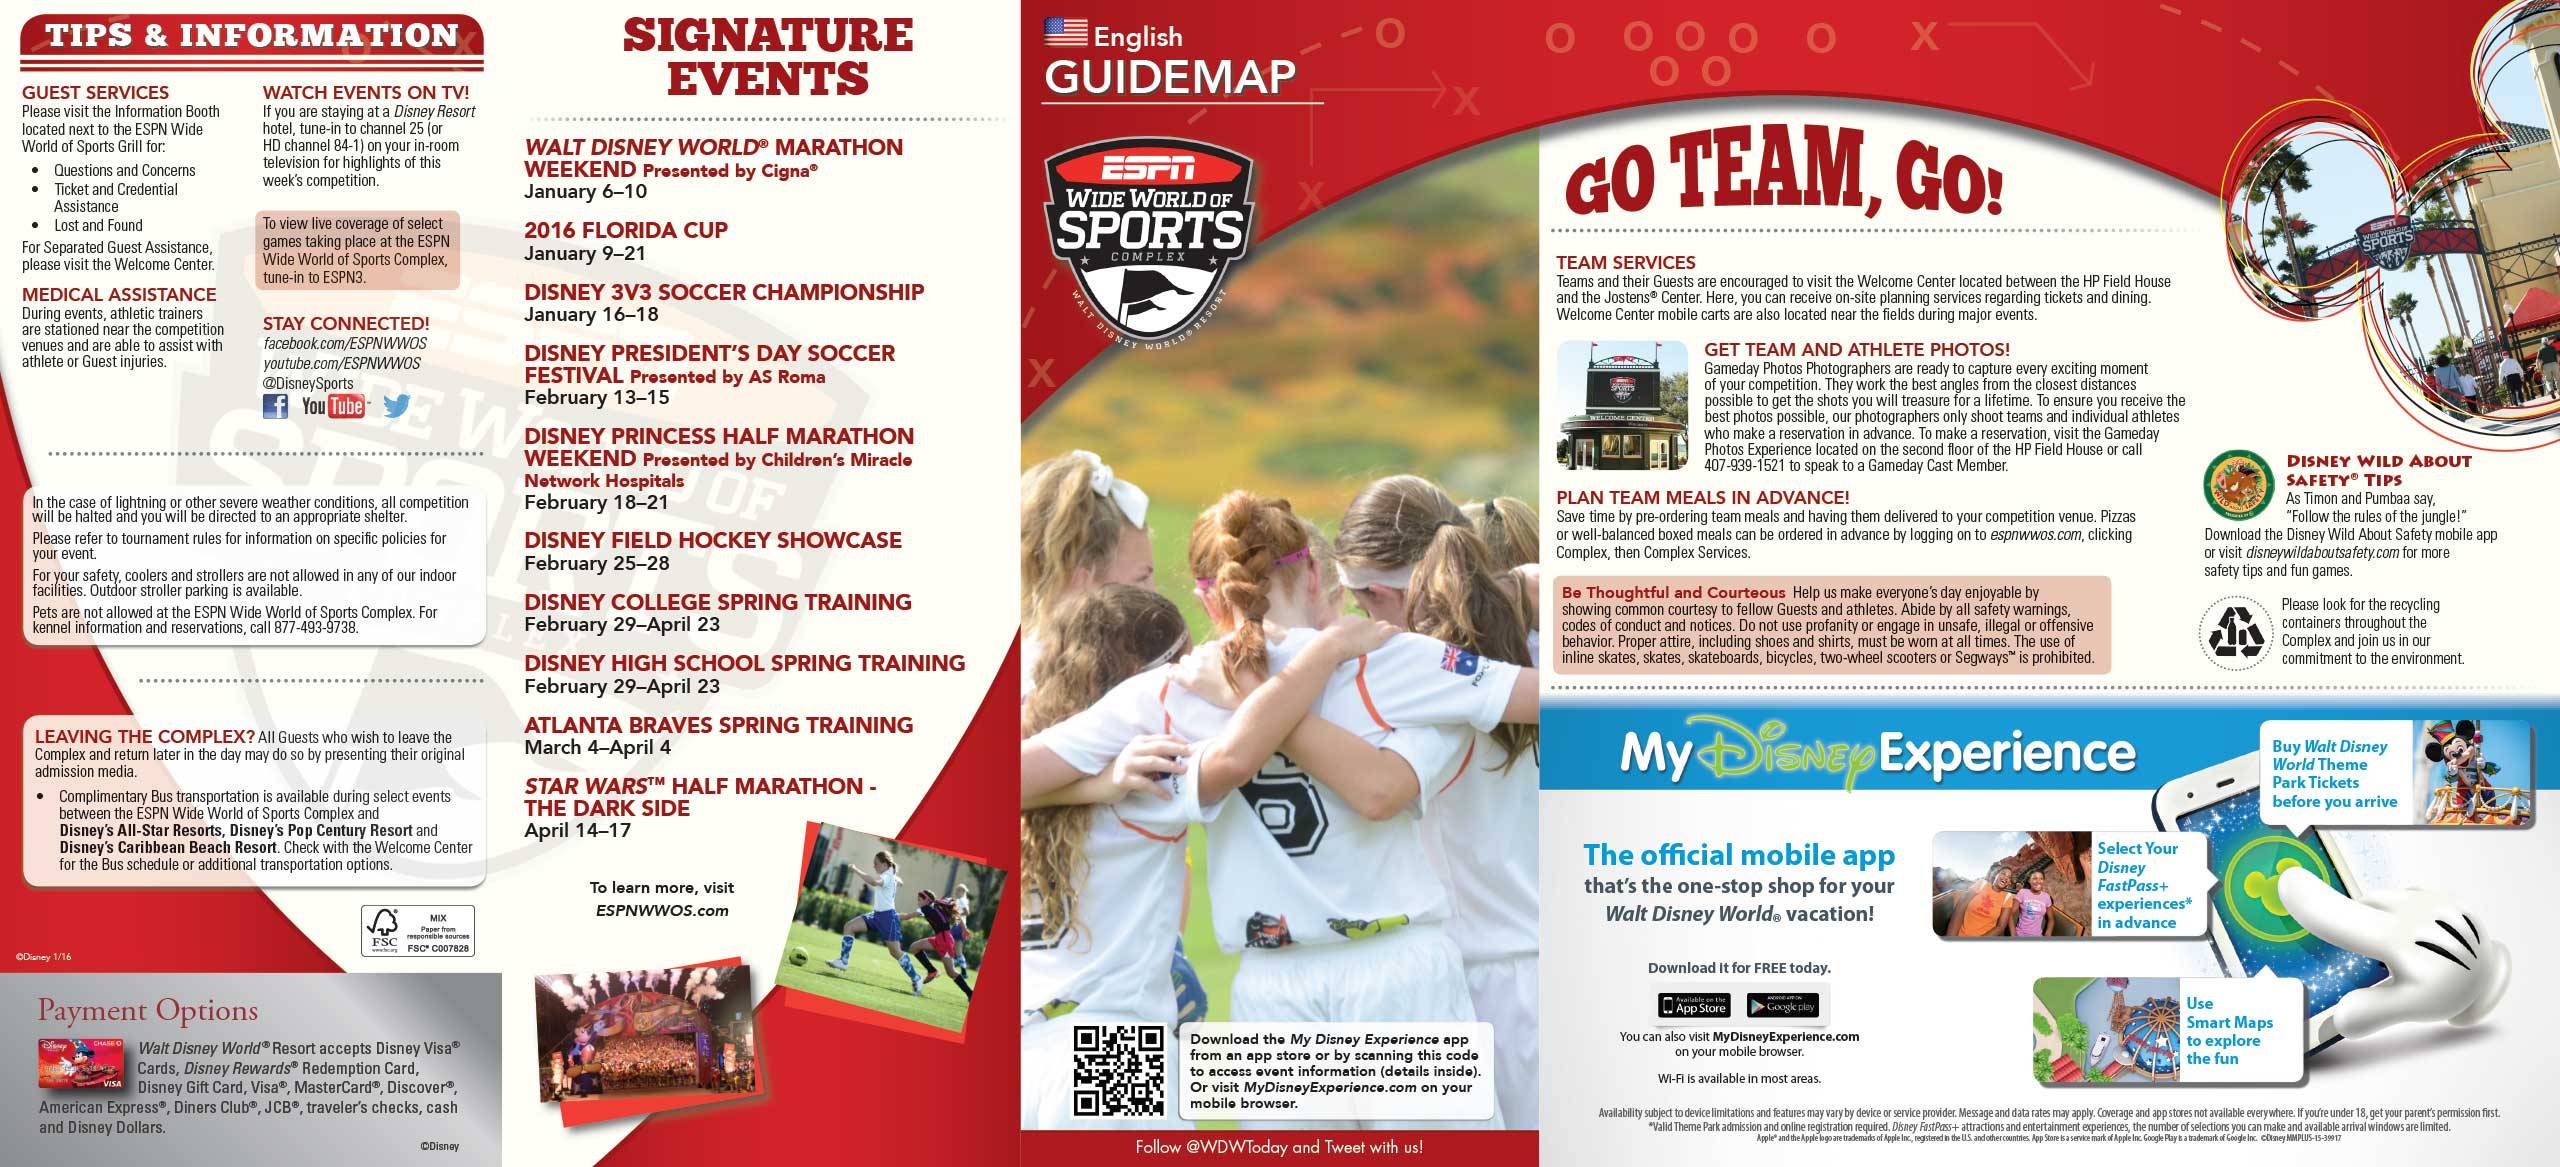 ESPN Wide World of Sports Guide Map May 2016 - Front